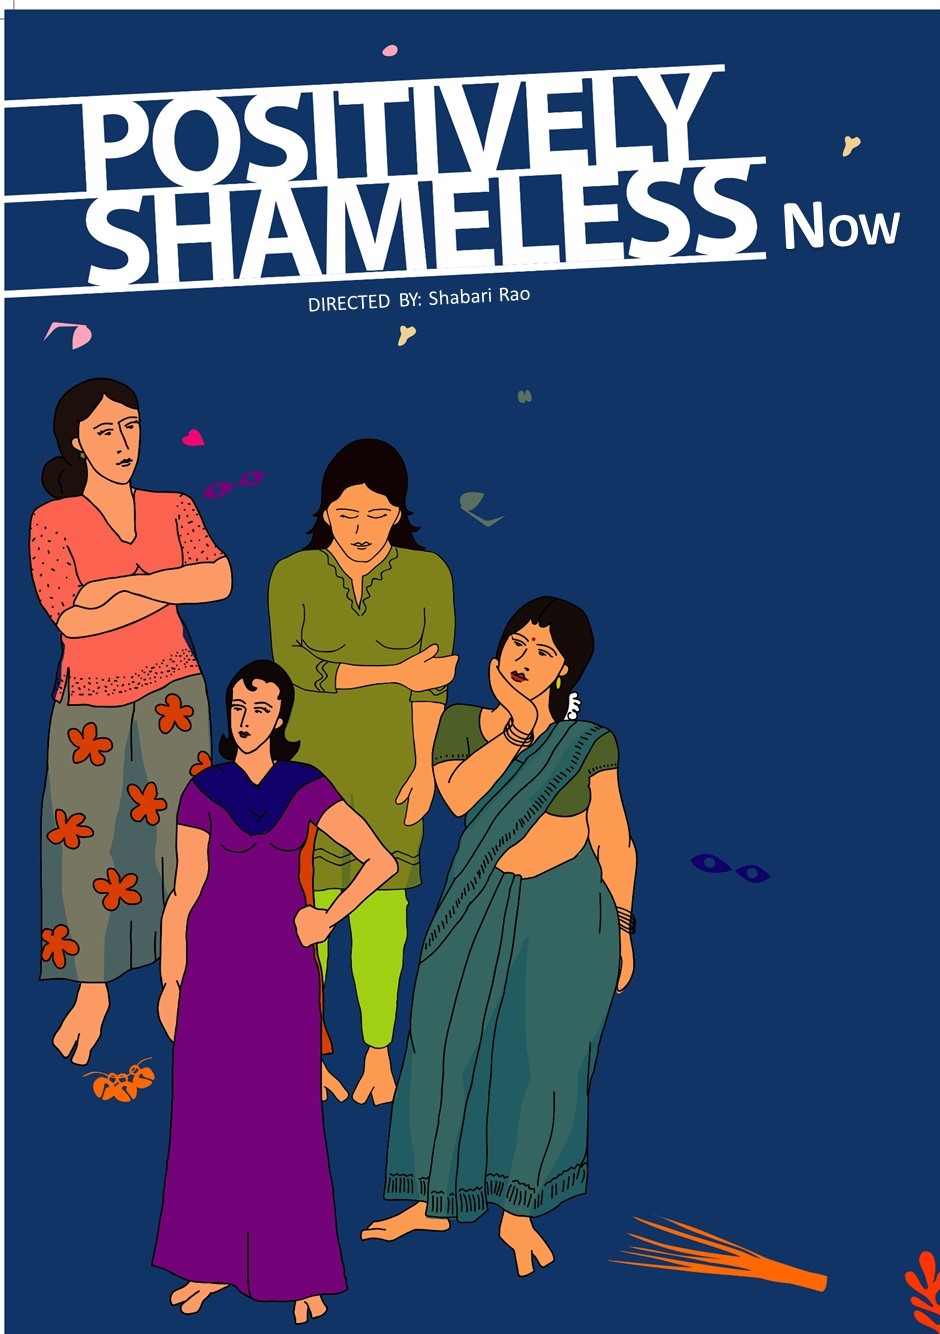 ‘Positively Shameless Now’ Brings Workshop, Performance to Campus October 30 and 31